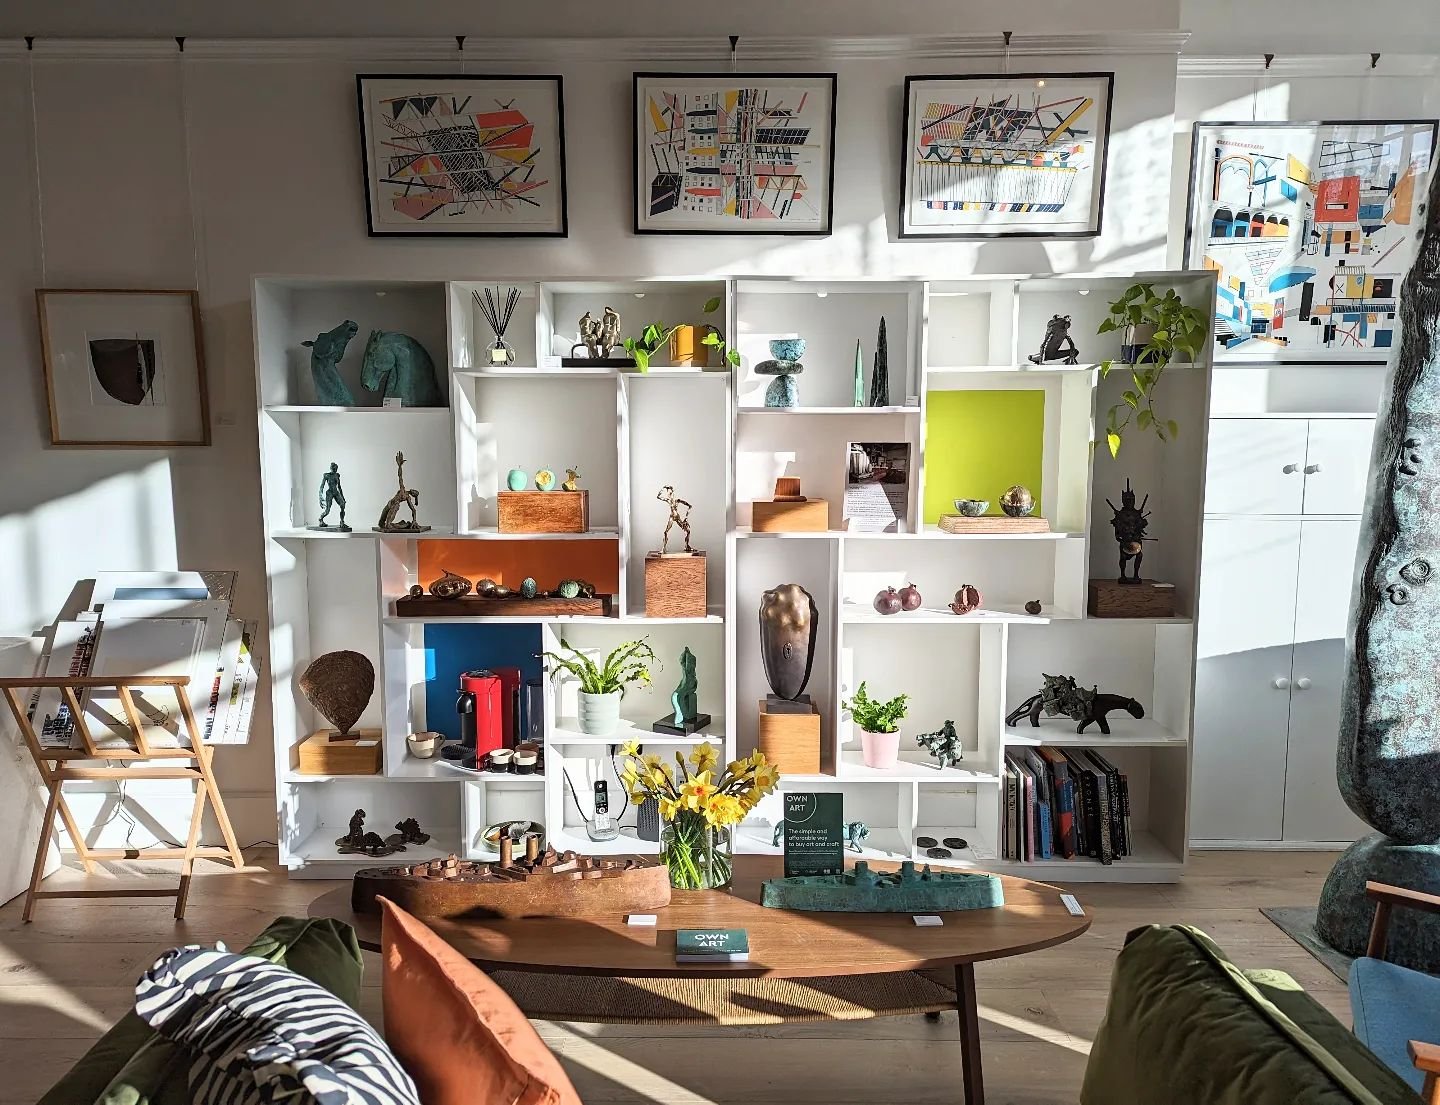 A sunny shot of the gallery from last week! Our bookshelf is full to the brim with beautiful pieces this weekend, pop in and have a look!

Open today and Sunday 12-4pm 🌞 

#edinburghart #edinburghbotanicgardens #edinburghgallery #edinburghweekend #w